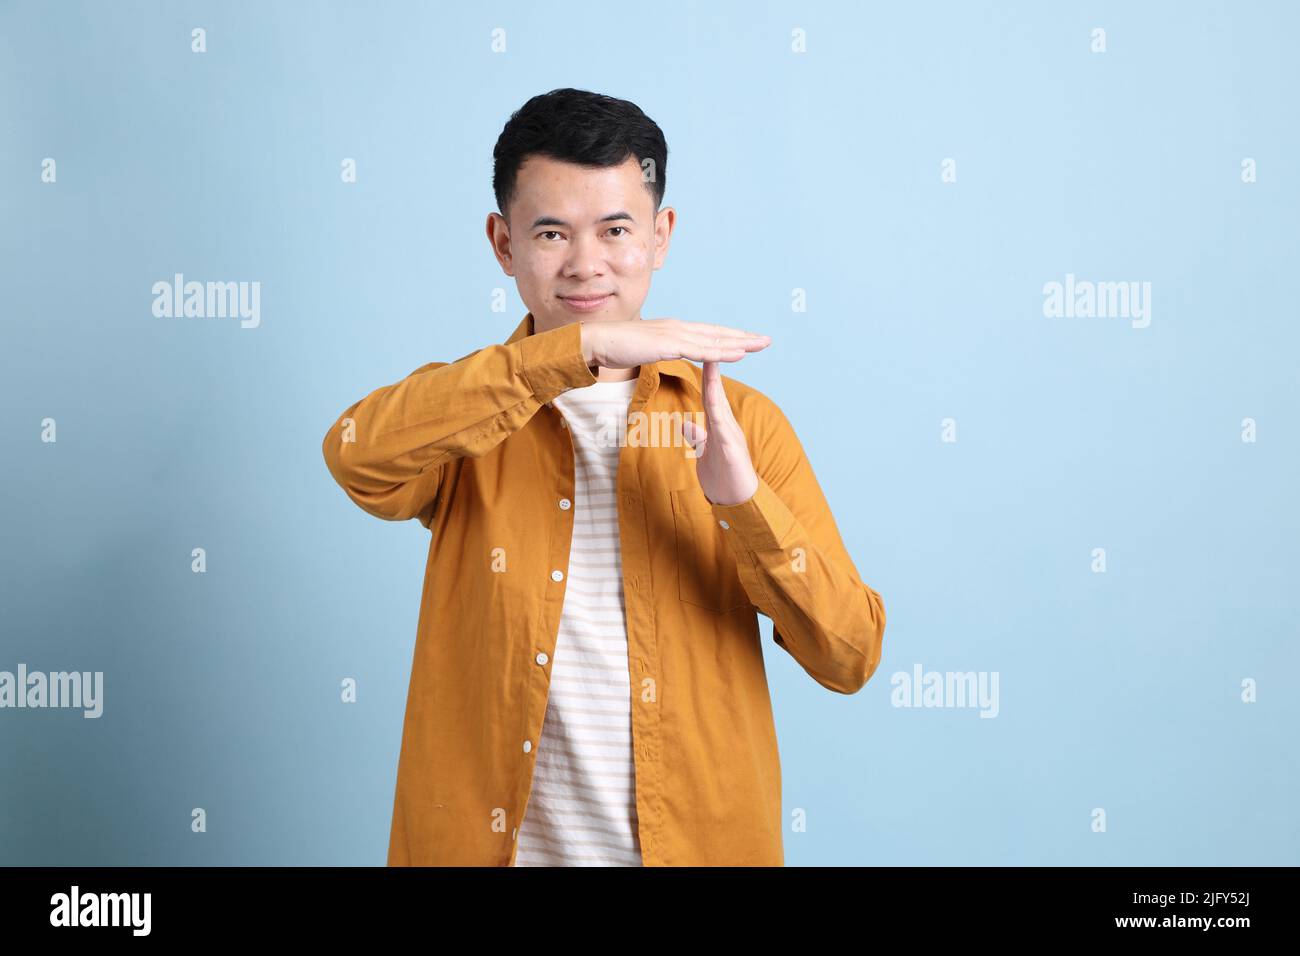 The Asian LGBTQ man with yellow shirt standing on the blue background. Stock Photo